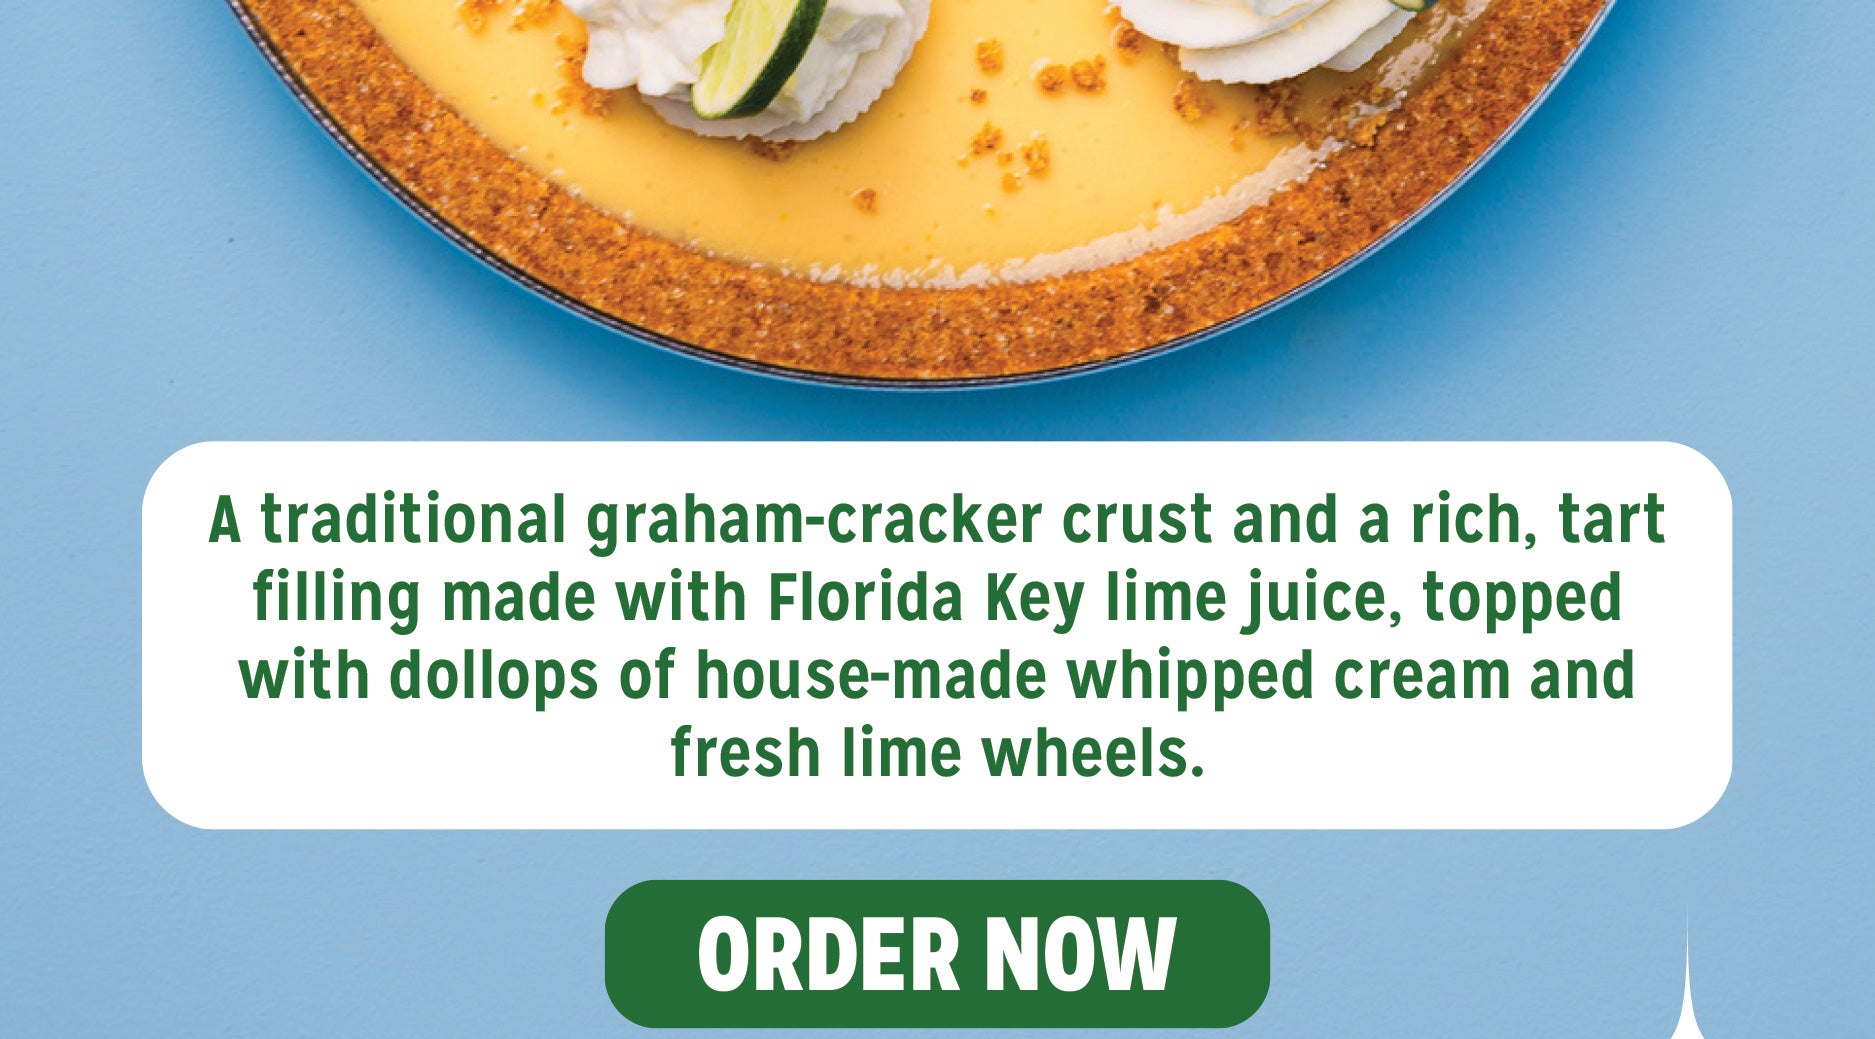 A traditional graham-cracker crust and a rich, tart filling made with Florida Key lime juice, topped with dollops of house-made whipped cream and fresh lime wheels. 